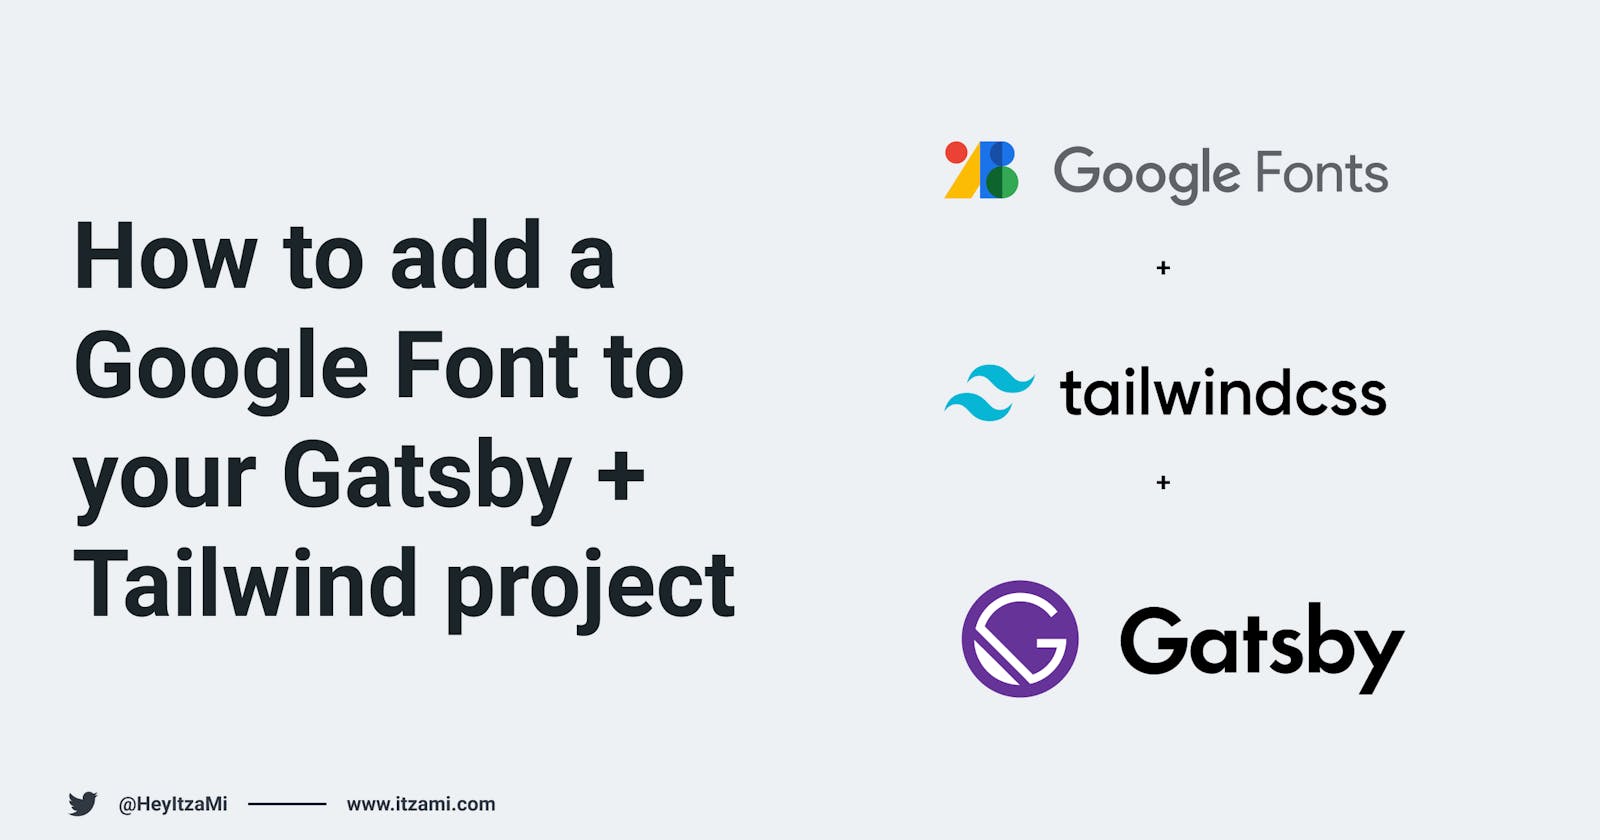 How to add a Google Font to your Gatsby + Tailwind project